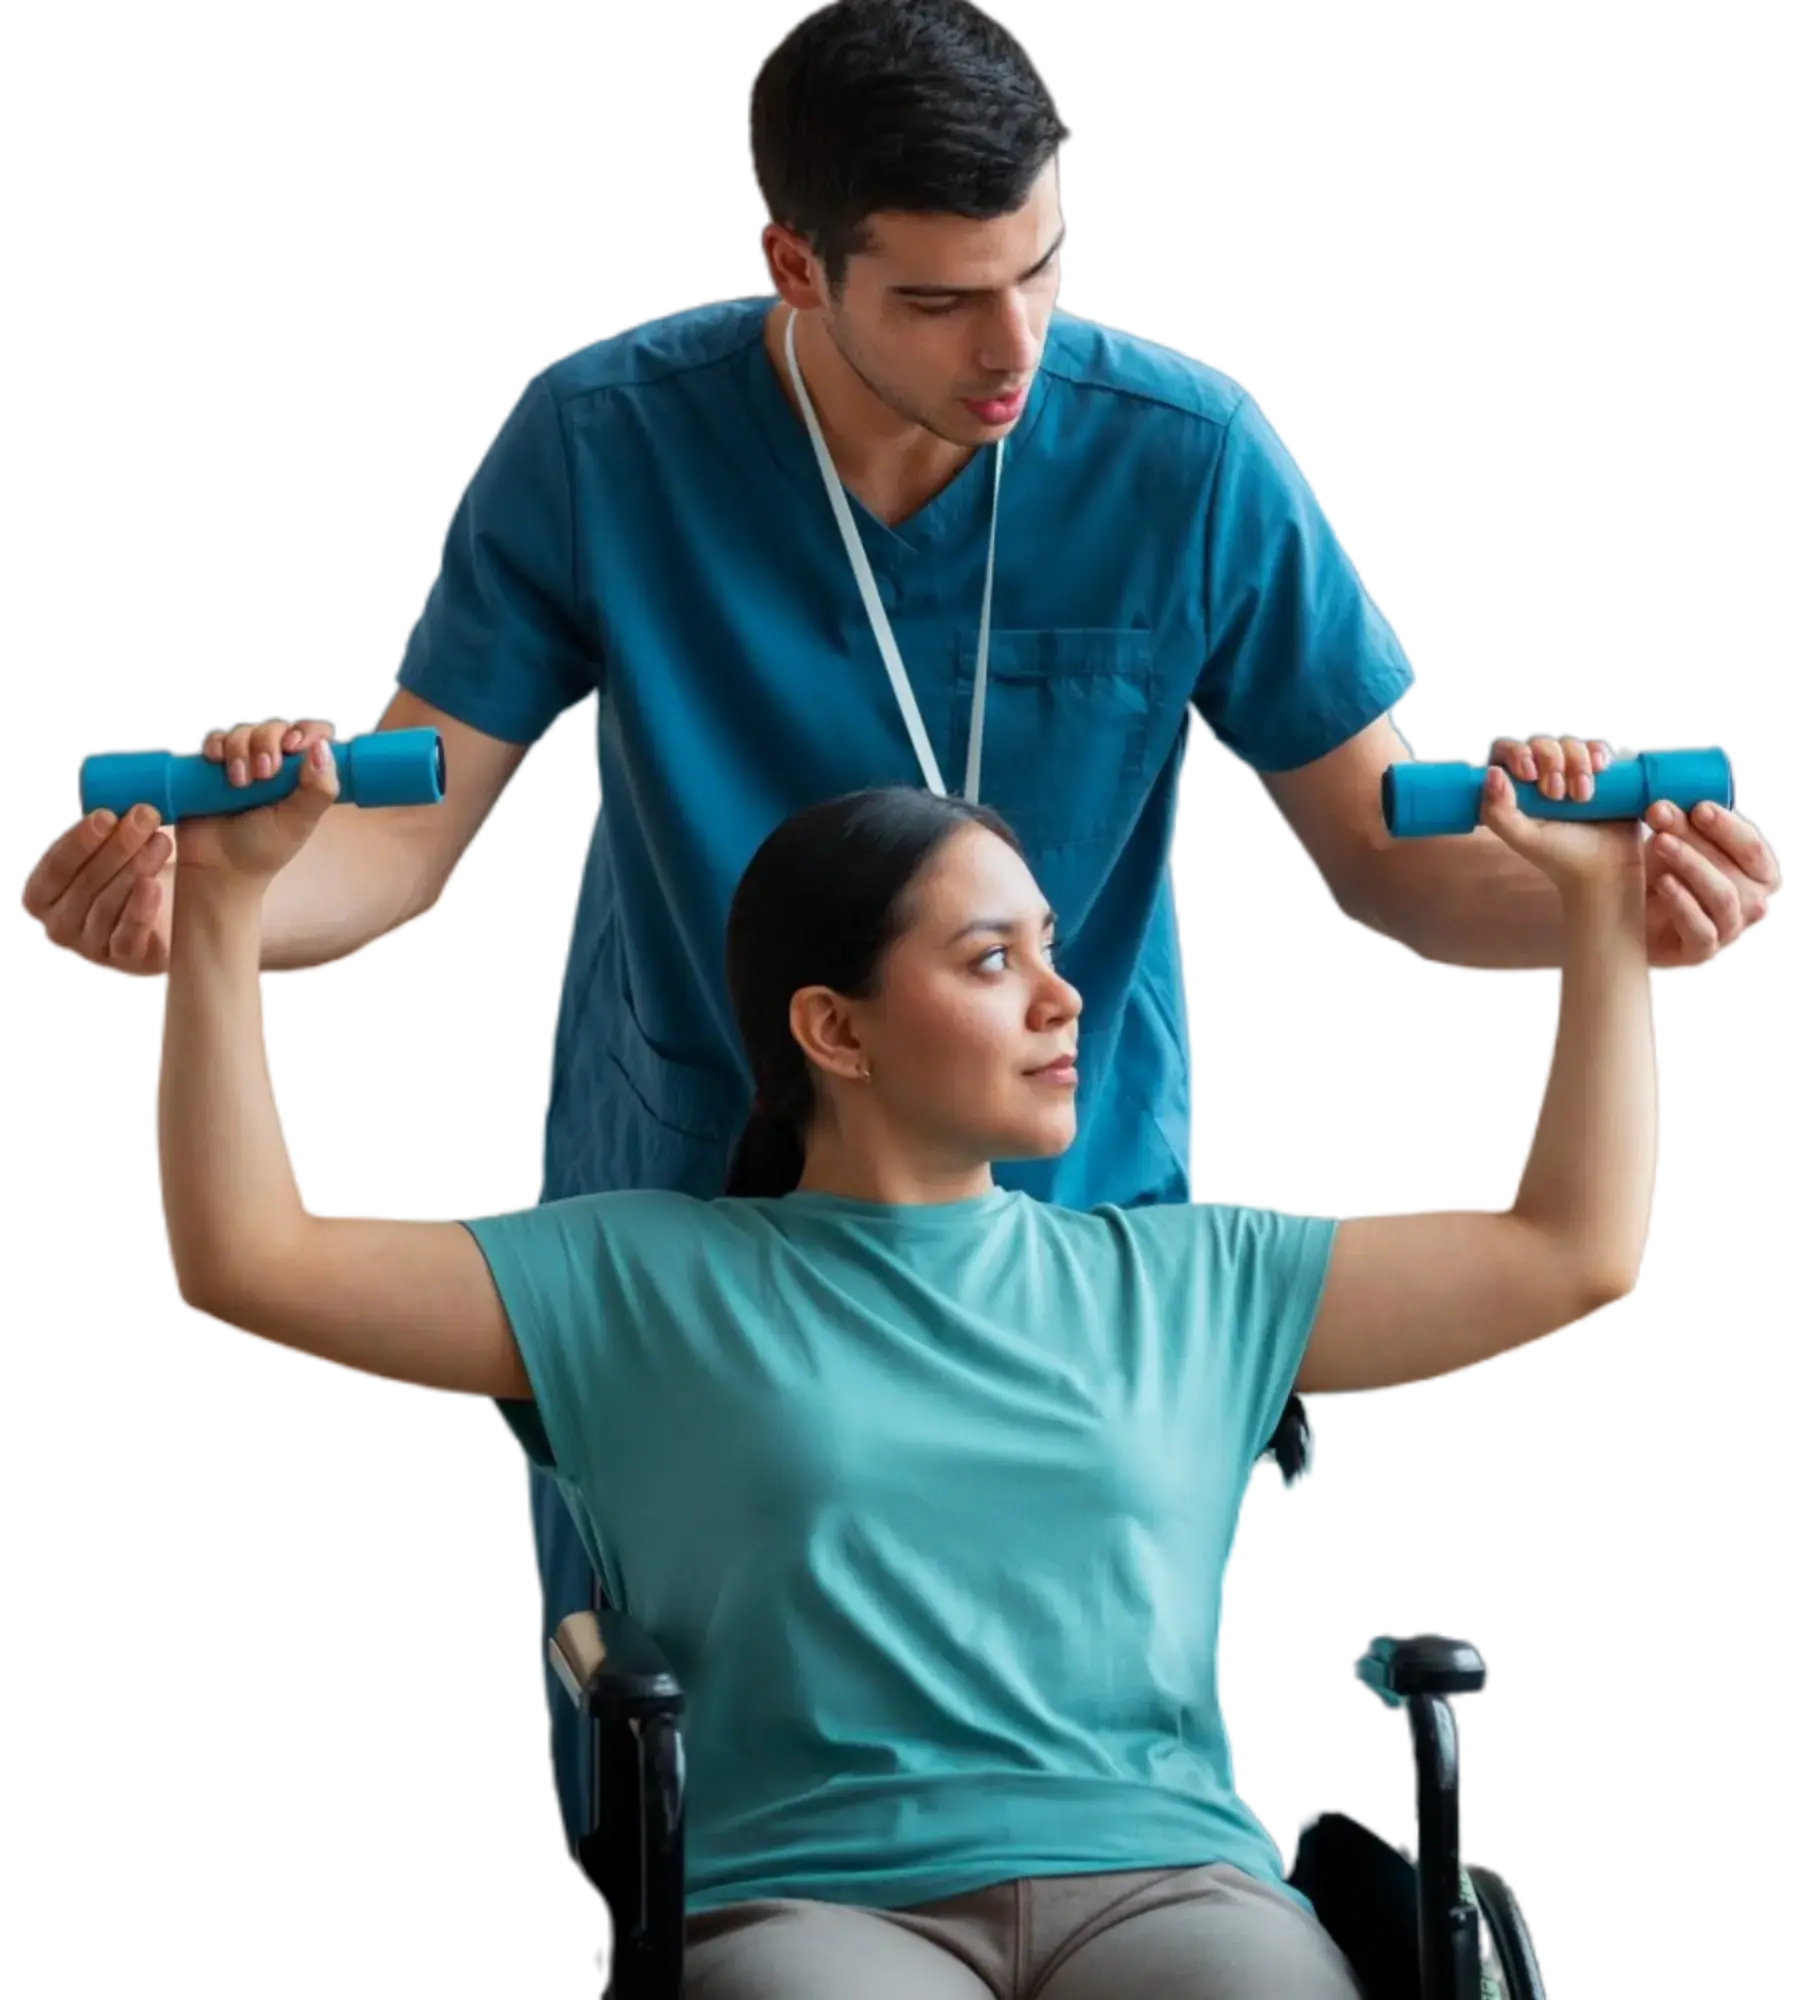 Physio with a patient in wheel chair during physiotherapy at home session.